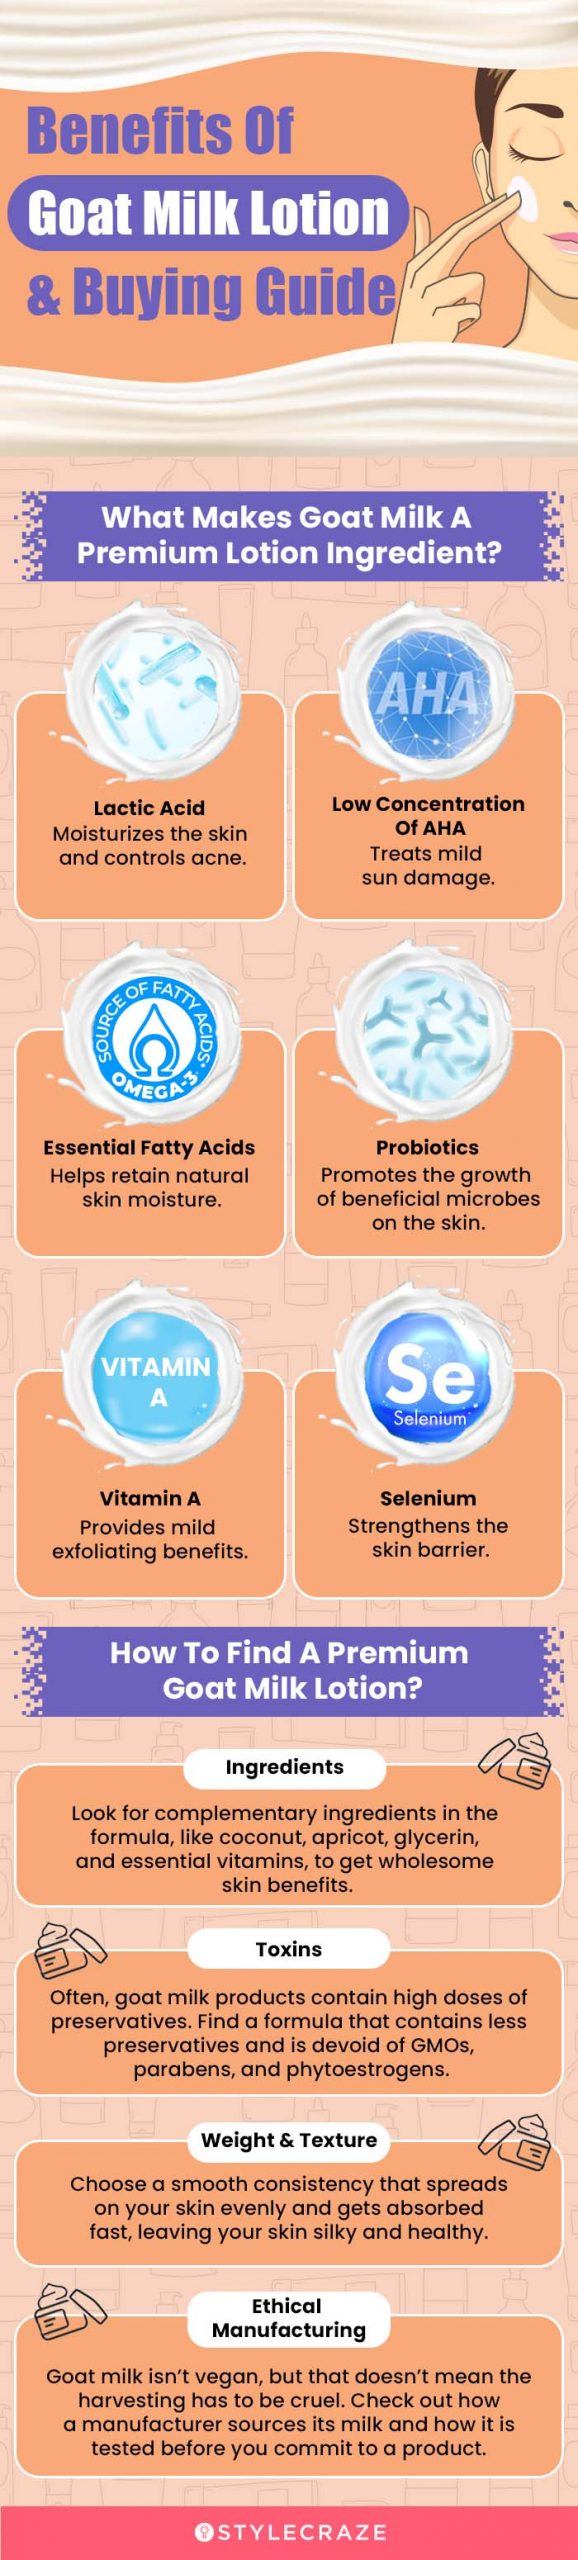 Benefits Of Goat Milk Lotion & Buying Guide (infographic)